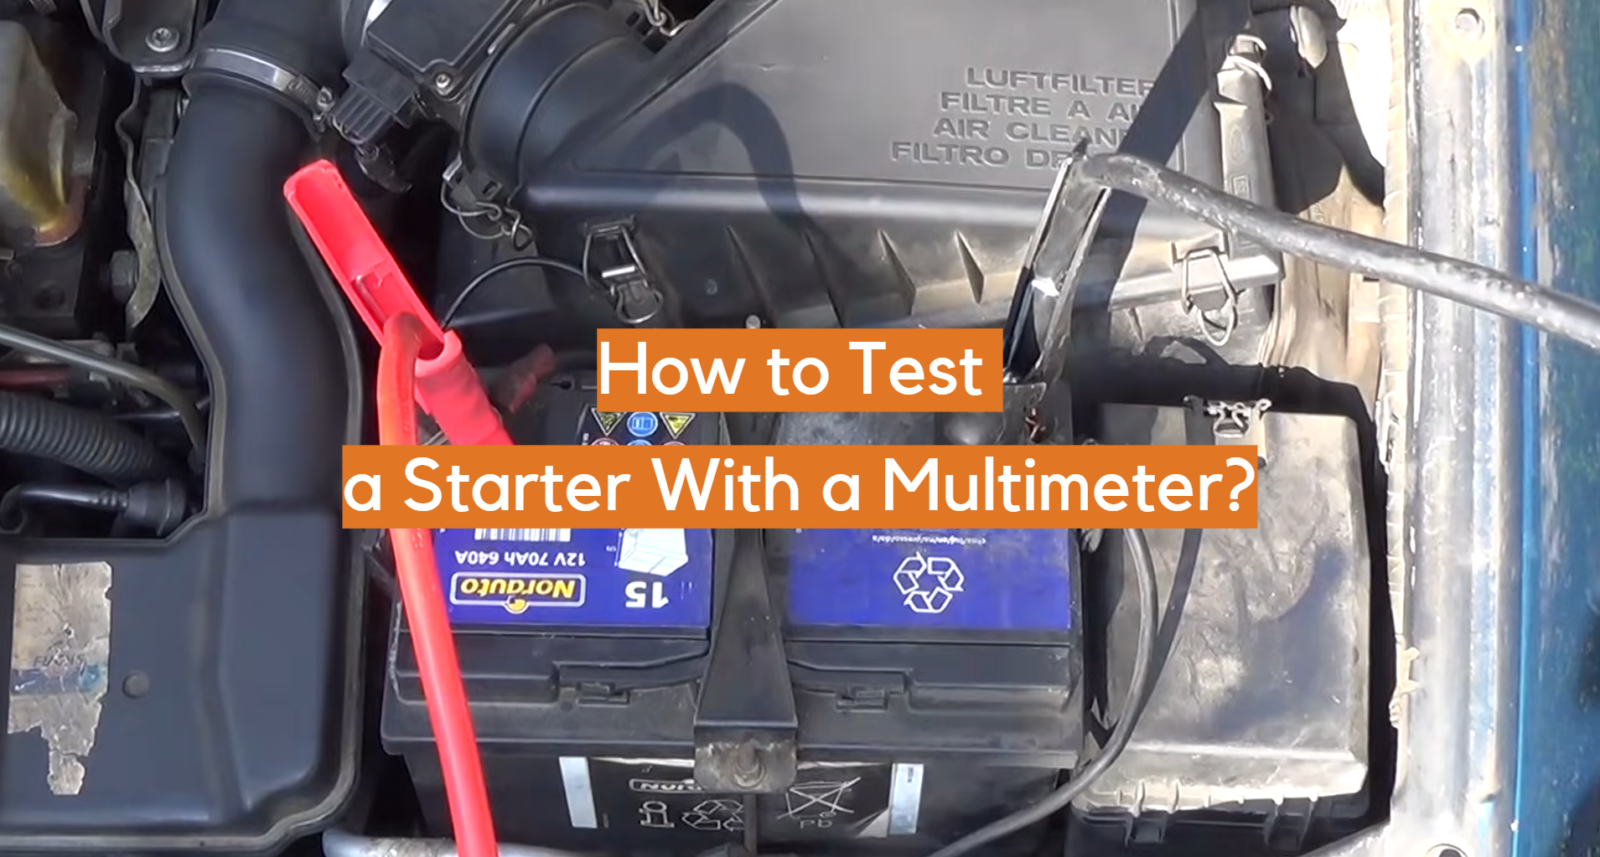 How to Test a Starter With a Multimeter?